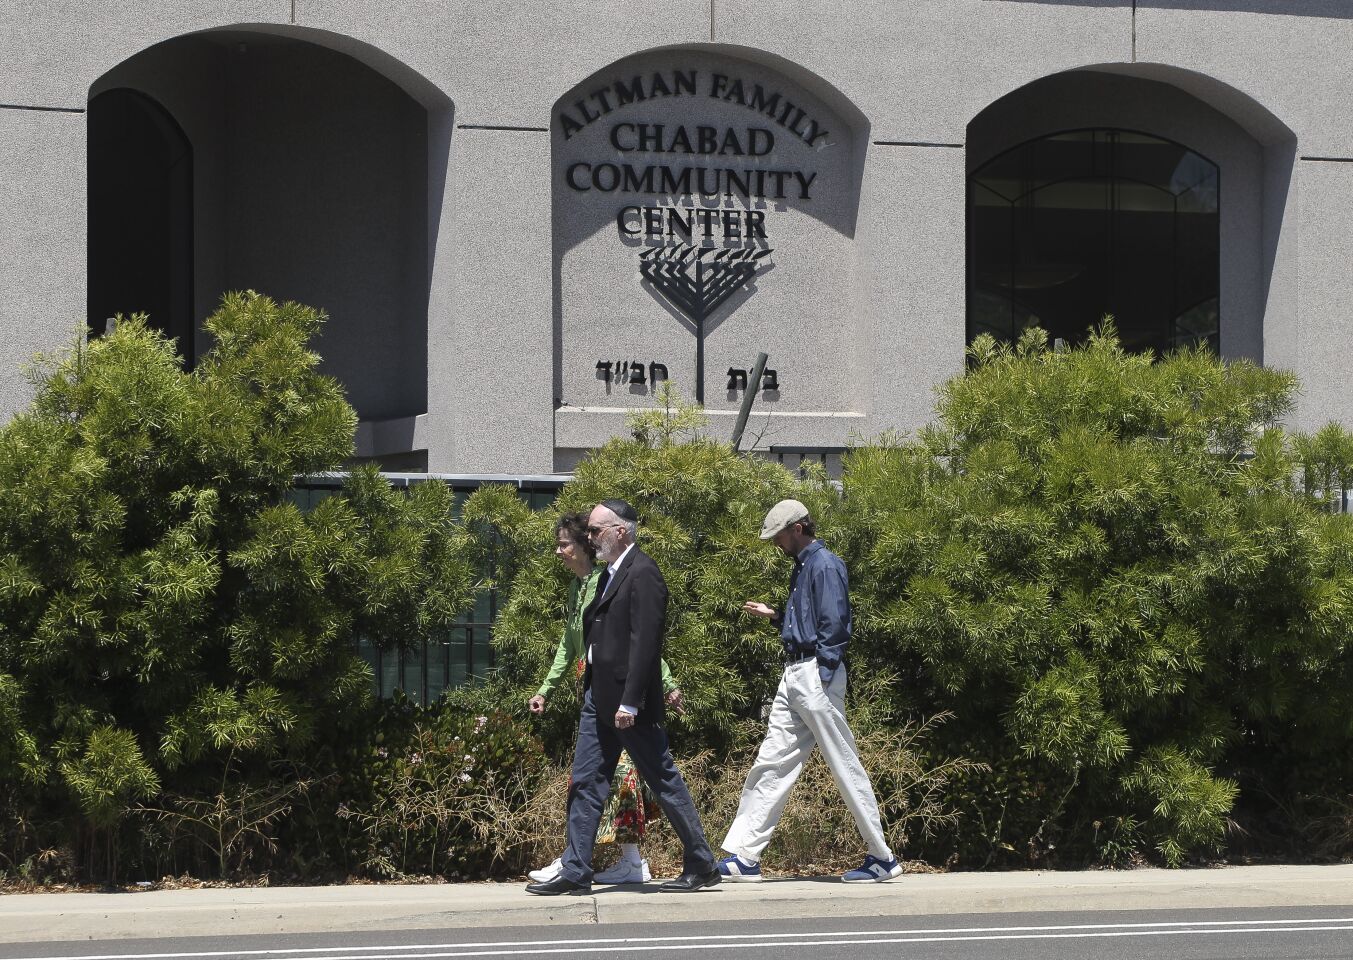 Two men and woman, who appeared to have come out of the the Altman Family Chabad Community Center, walk in front of the community center where a man with a gun shot multiple people inside, killing one, in Poway on Saturday, April 27, 2019 in Poway, California.